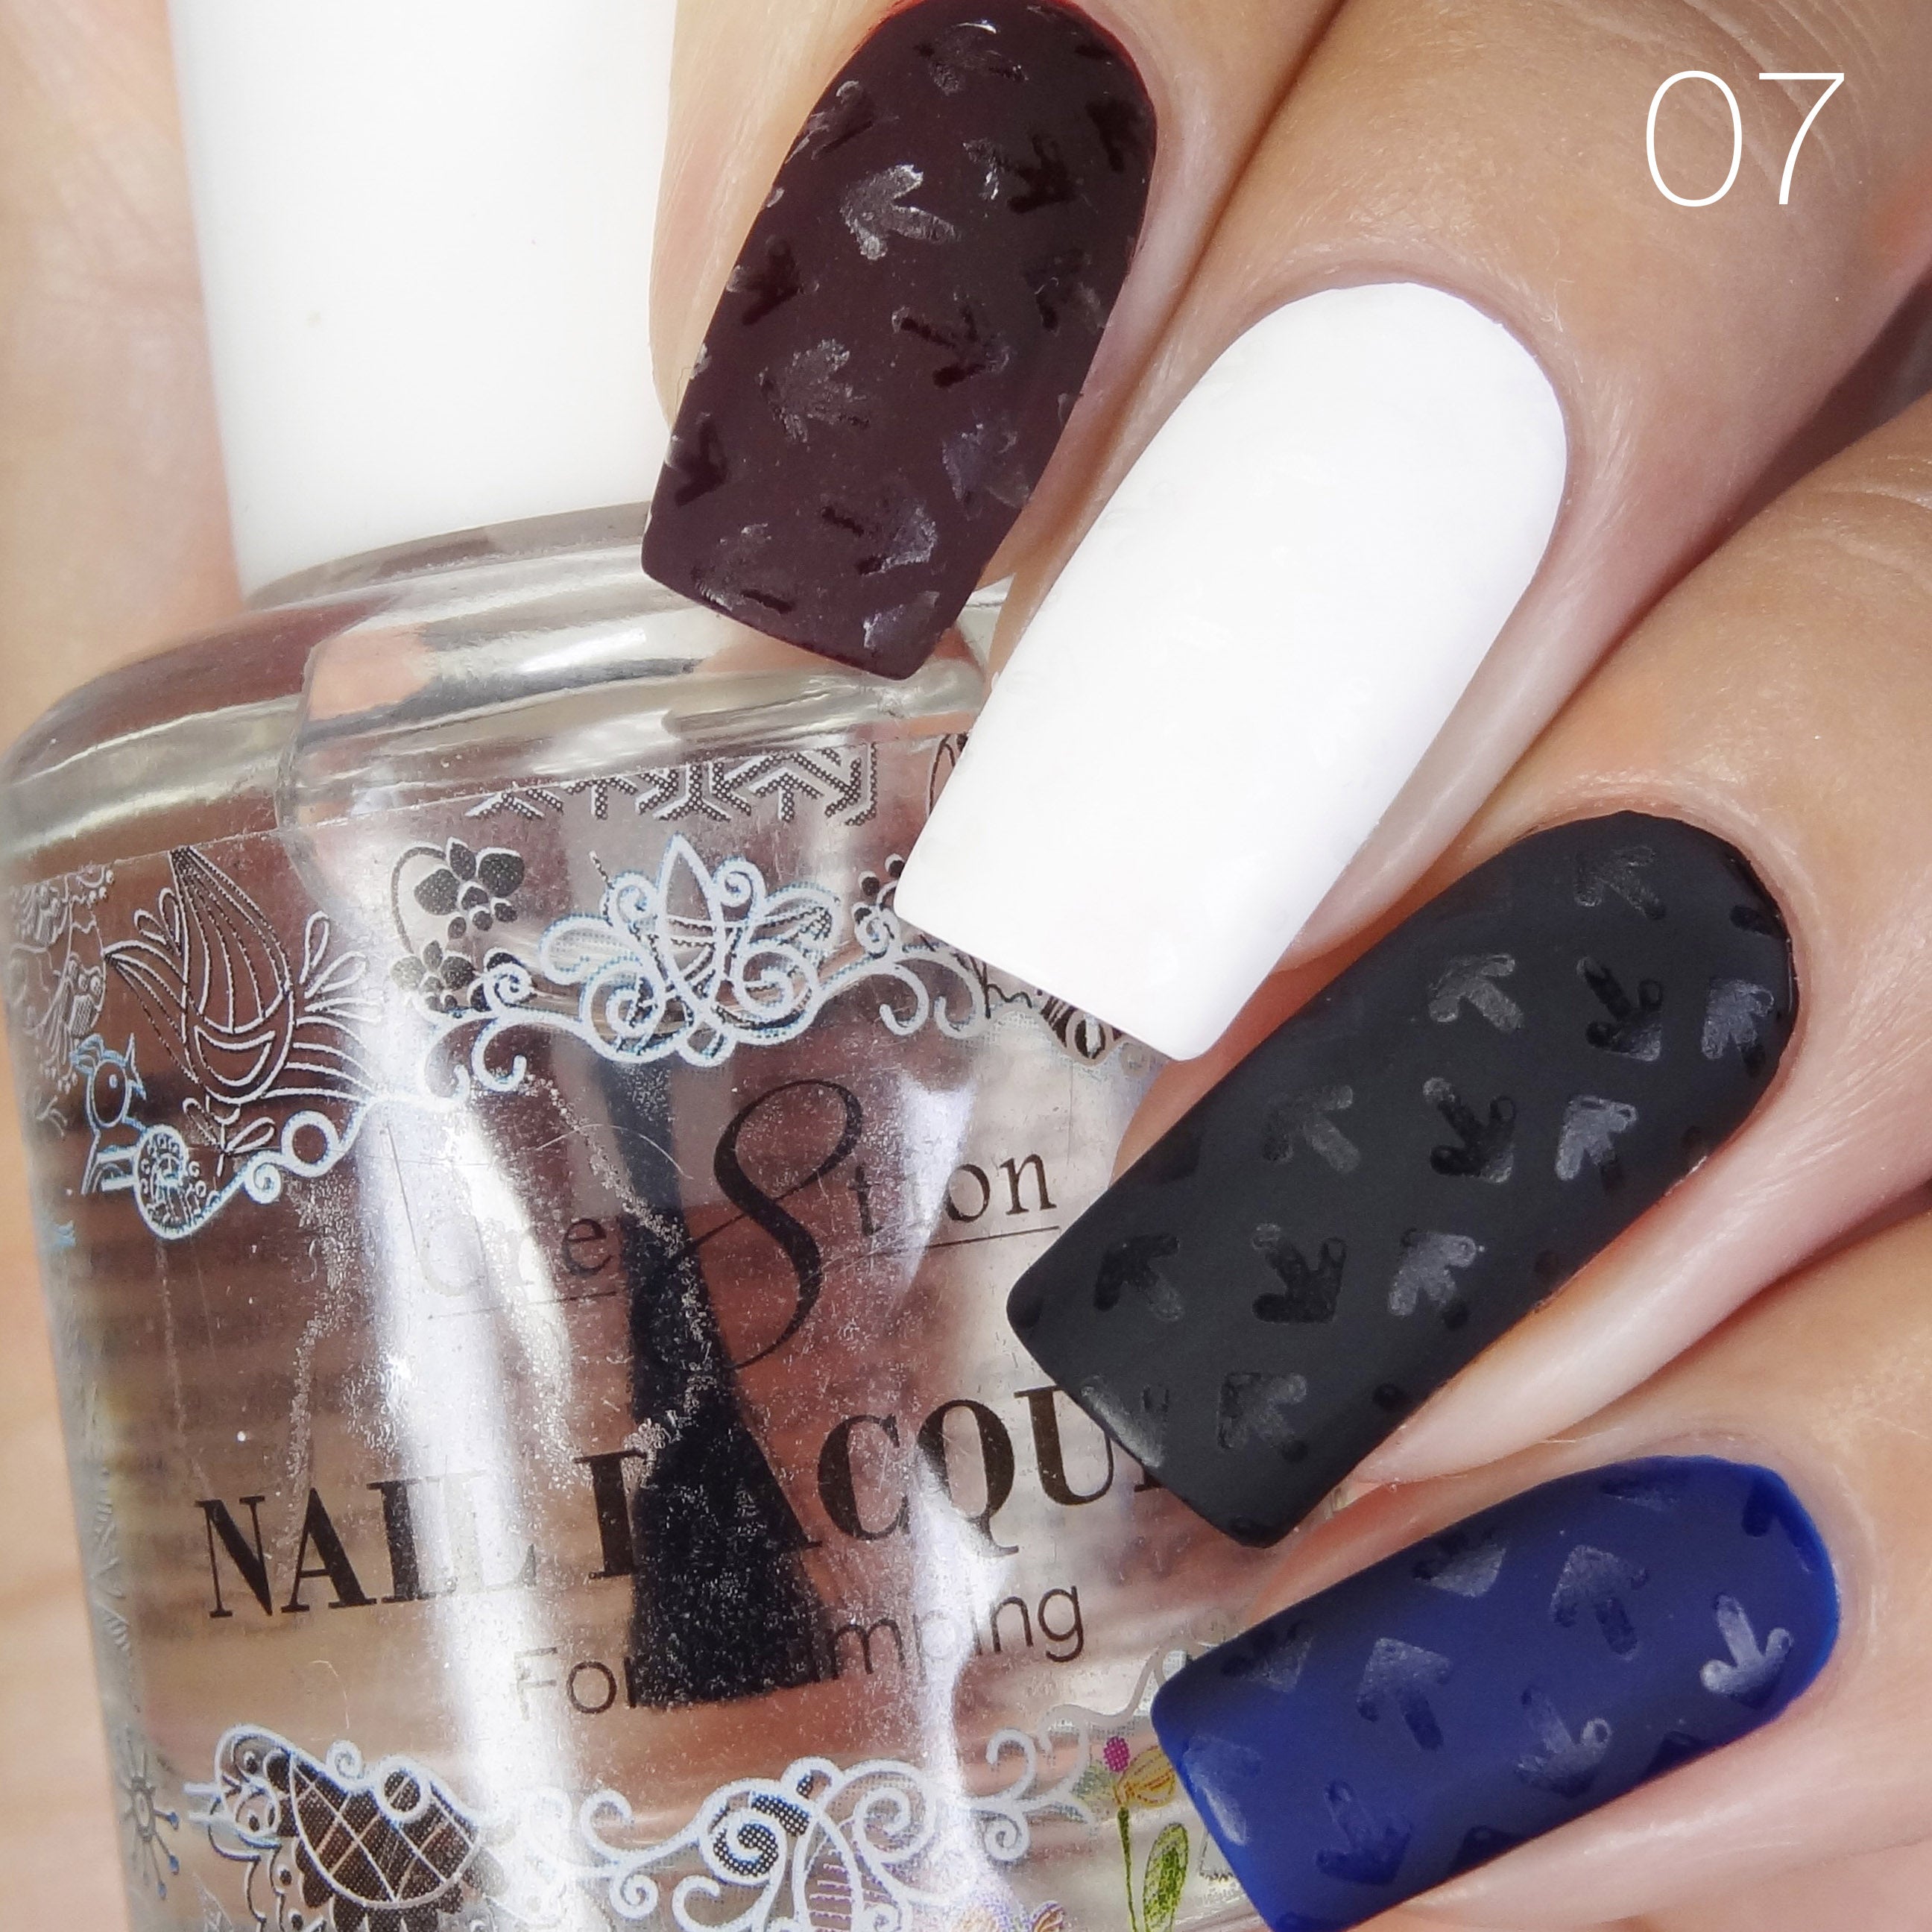 Cre8tion - Stamping Nail Art Lacquer 07